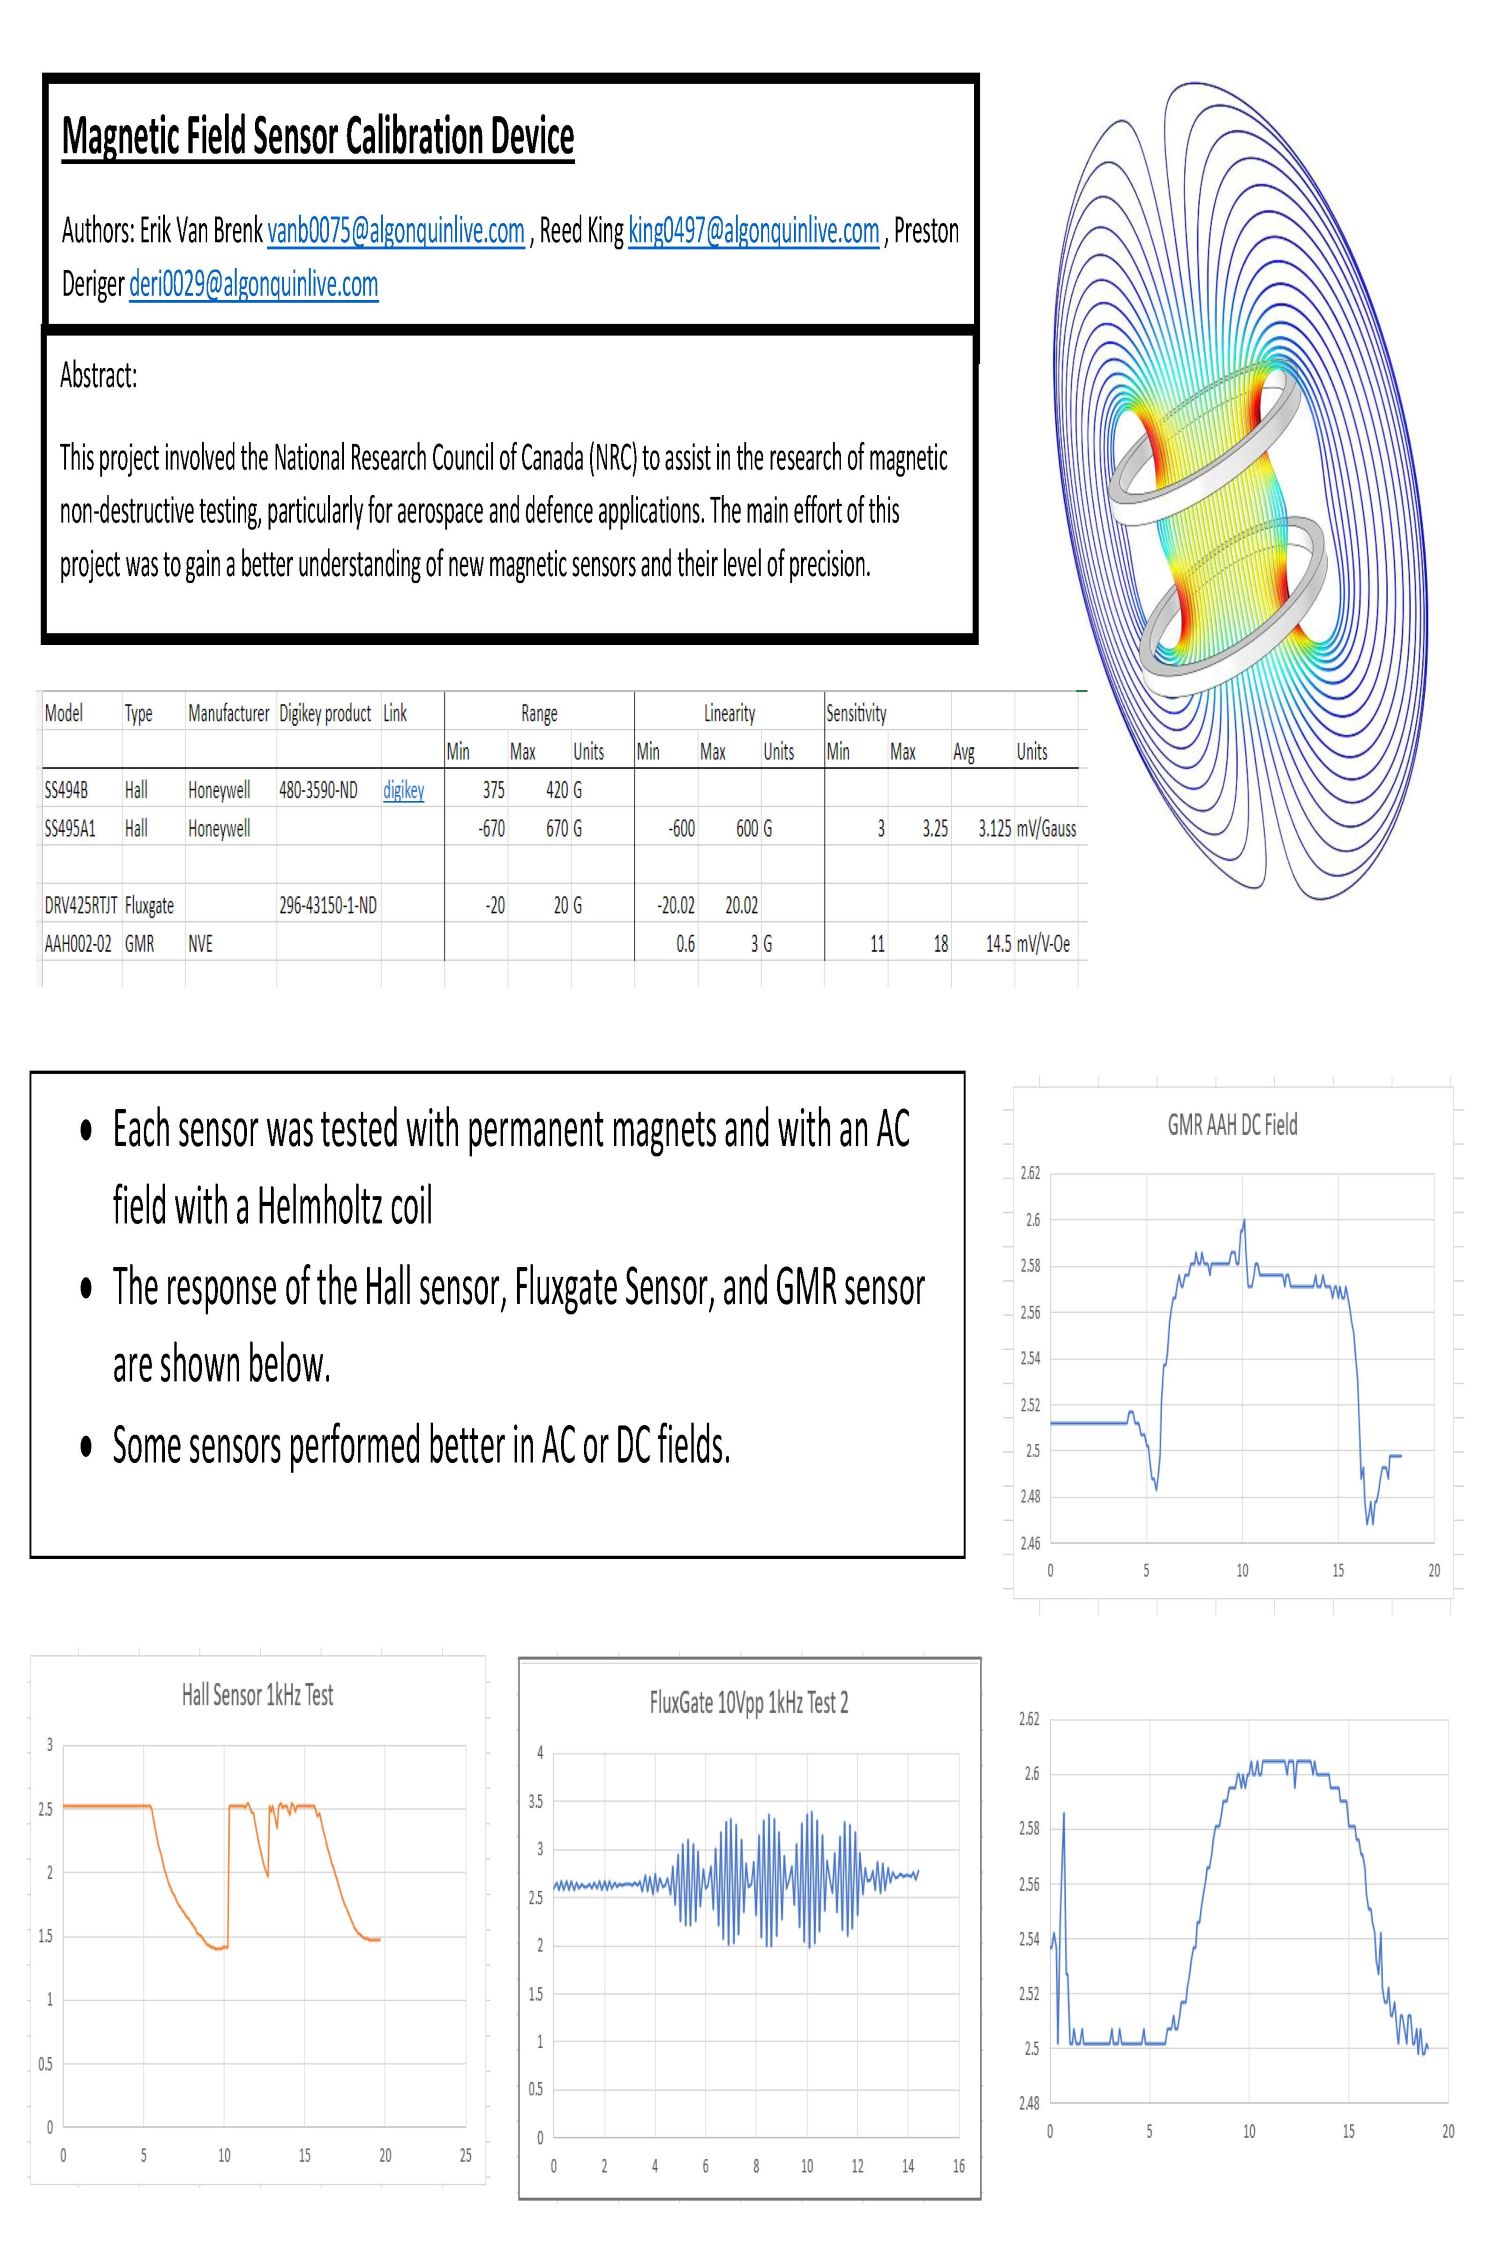 Graphs and information on a poster